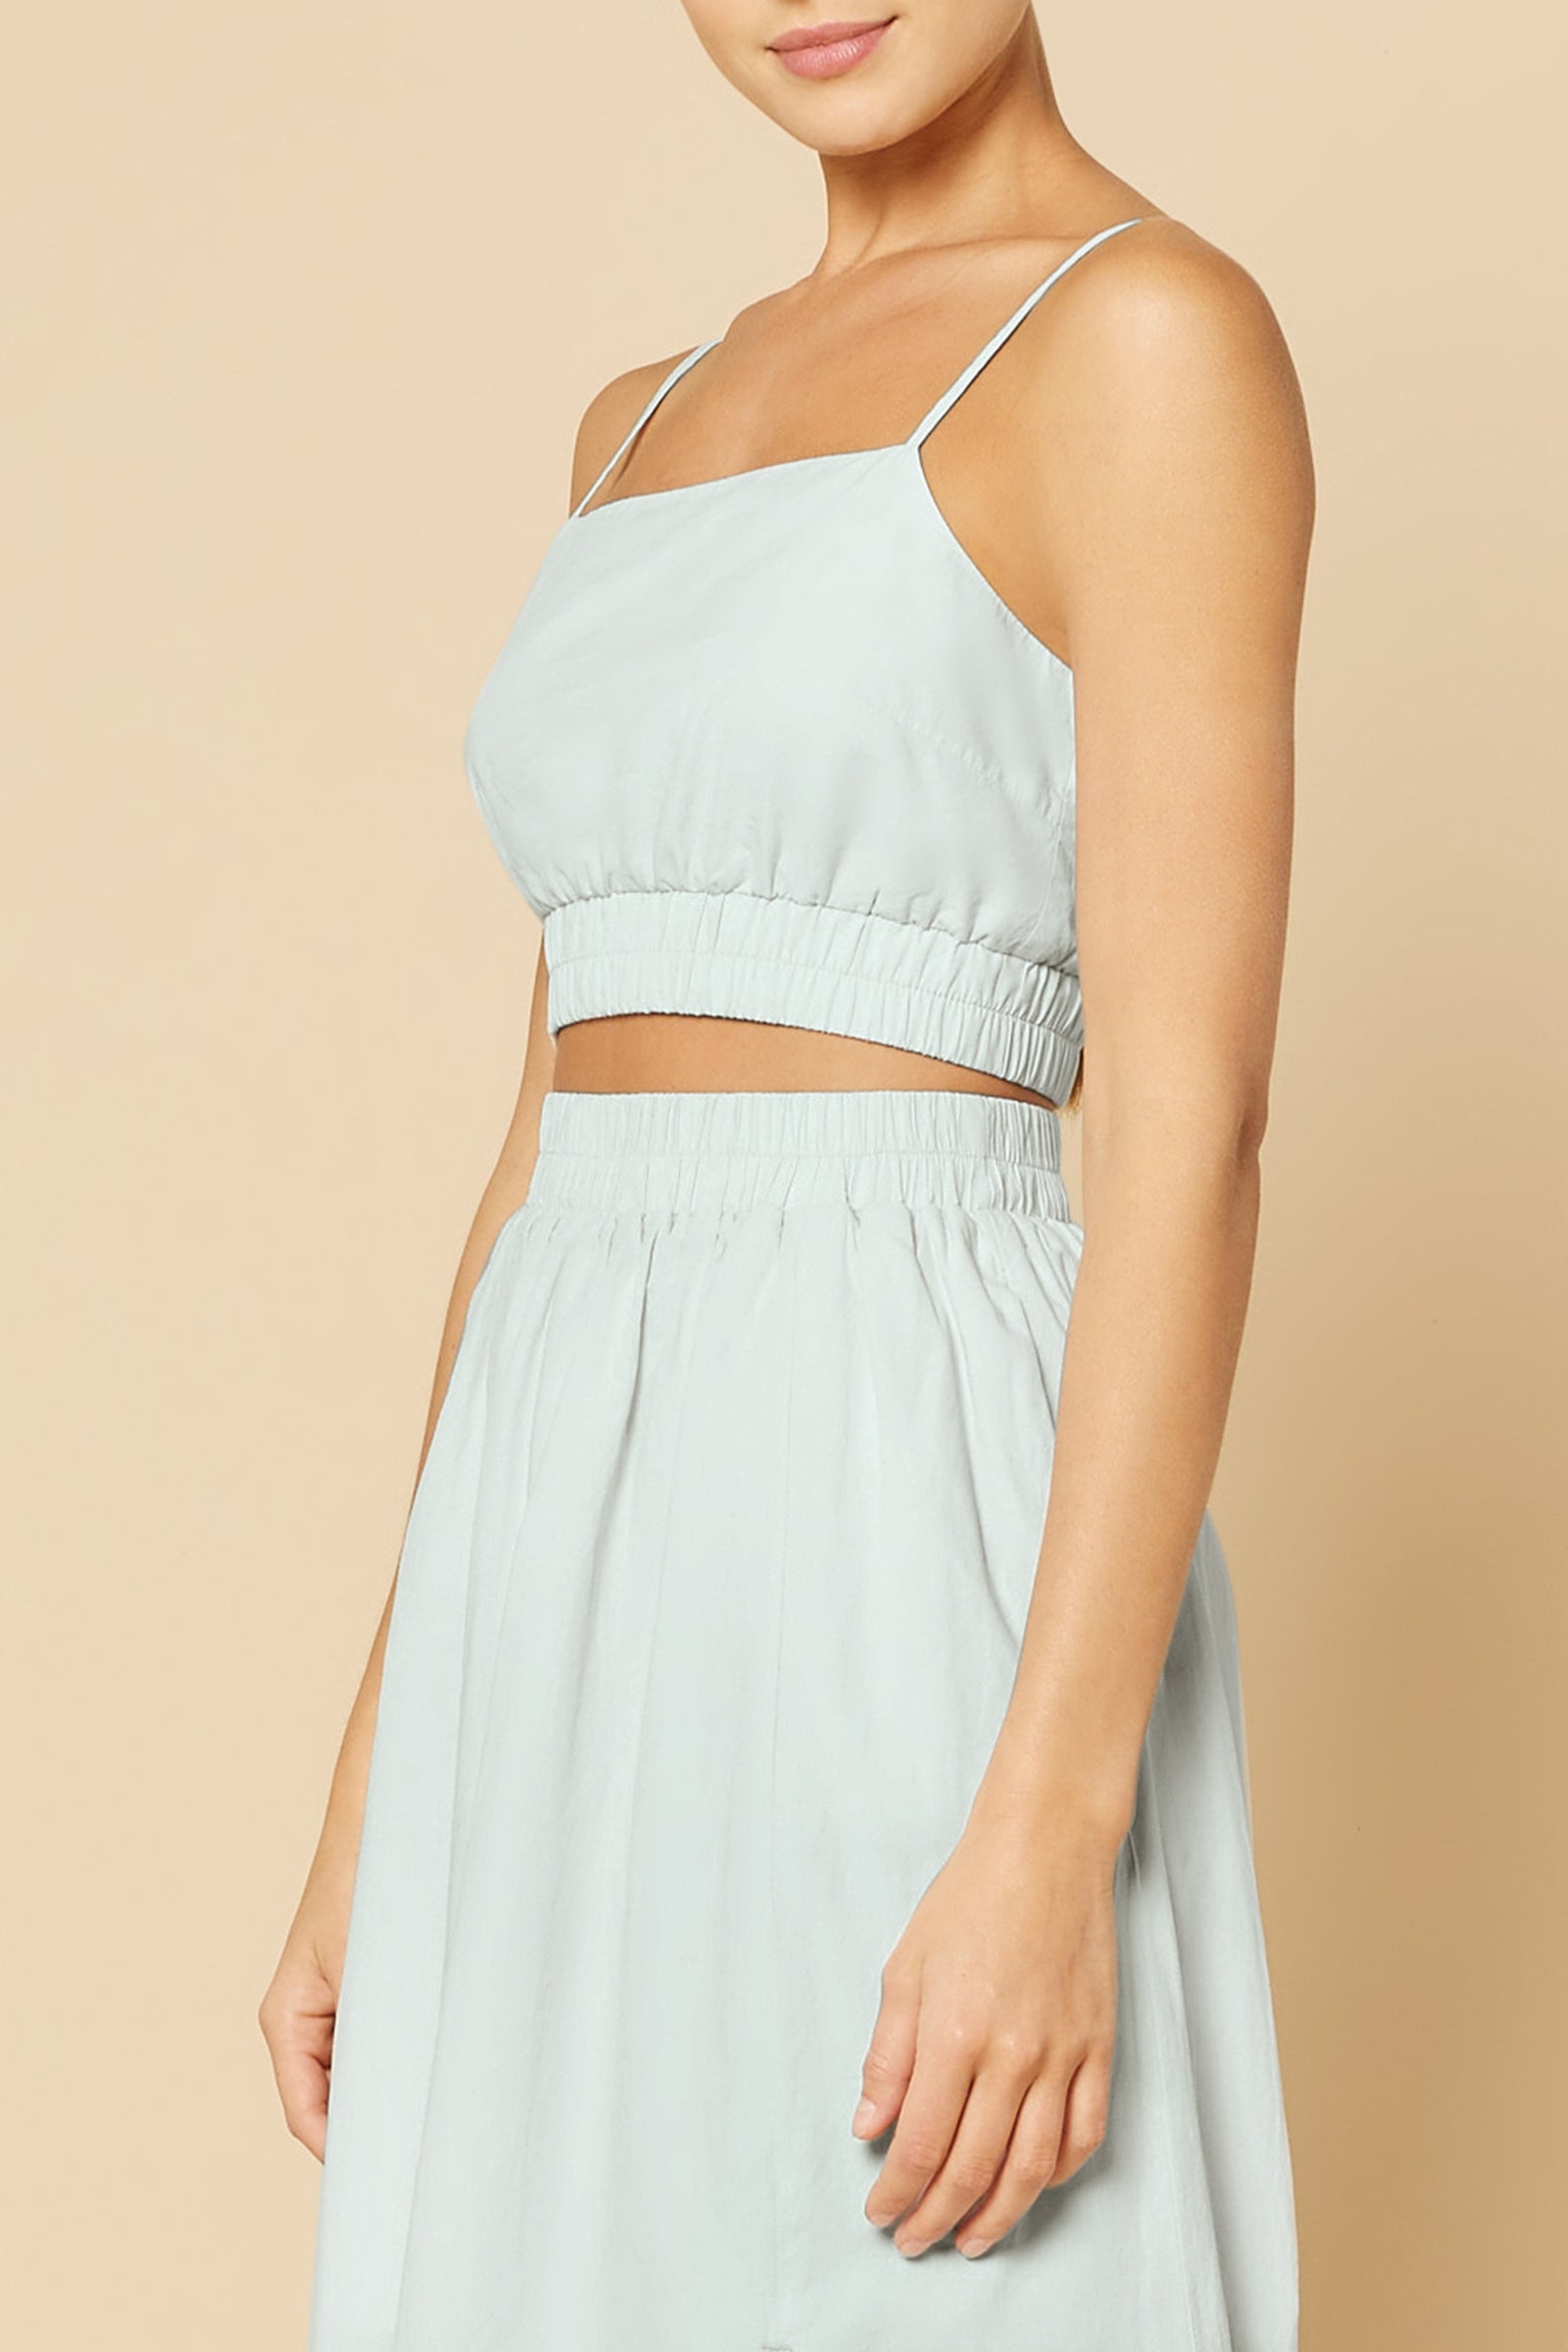 Nude Lucy Odessa Poplin Crop Camisole Top In A Ice White Colour 